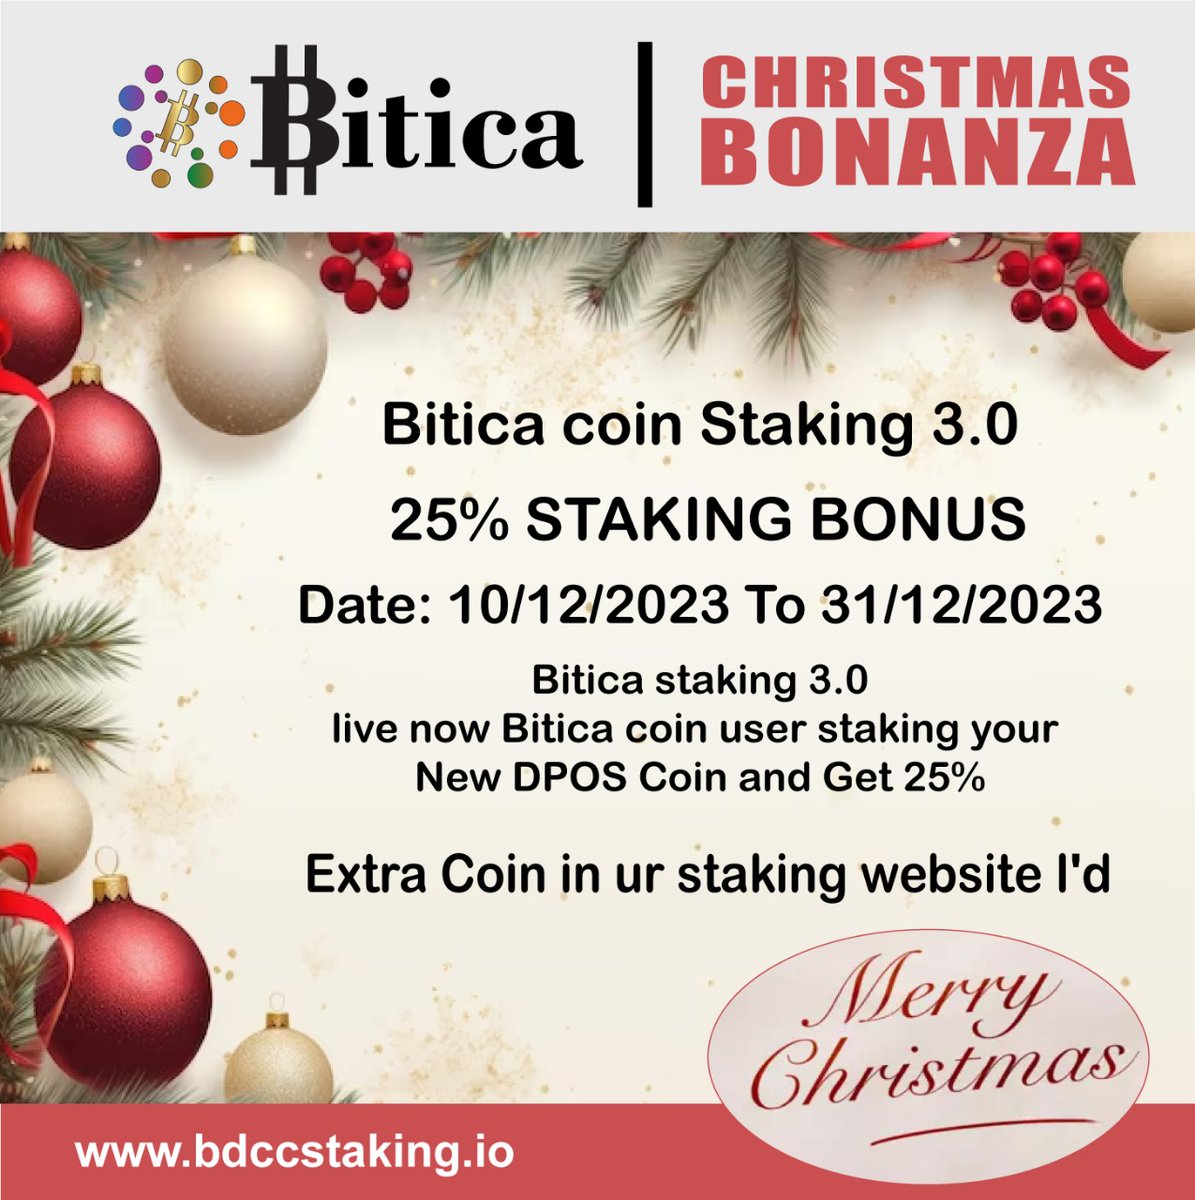 BITICA COIN CHRISTMAS BONANZA Bitica coin Staking 3.0 25% STAKING BONUS Date: 10/12/2023 To 31/12/2023 Bitica staking 3.0 live now Bitica coin user staking ur New DPOS Coin and Get 25% Extra Coin in ur staking website I'd Thanx Team Bitica